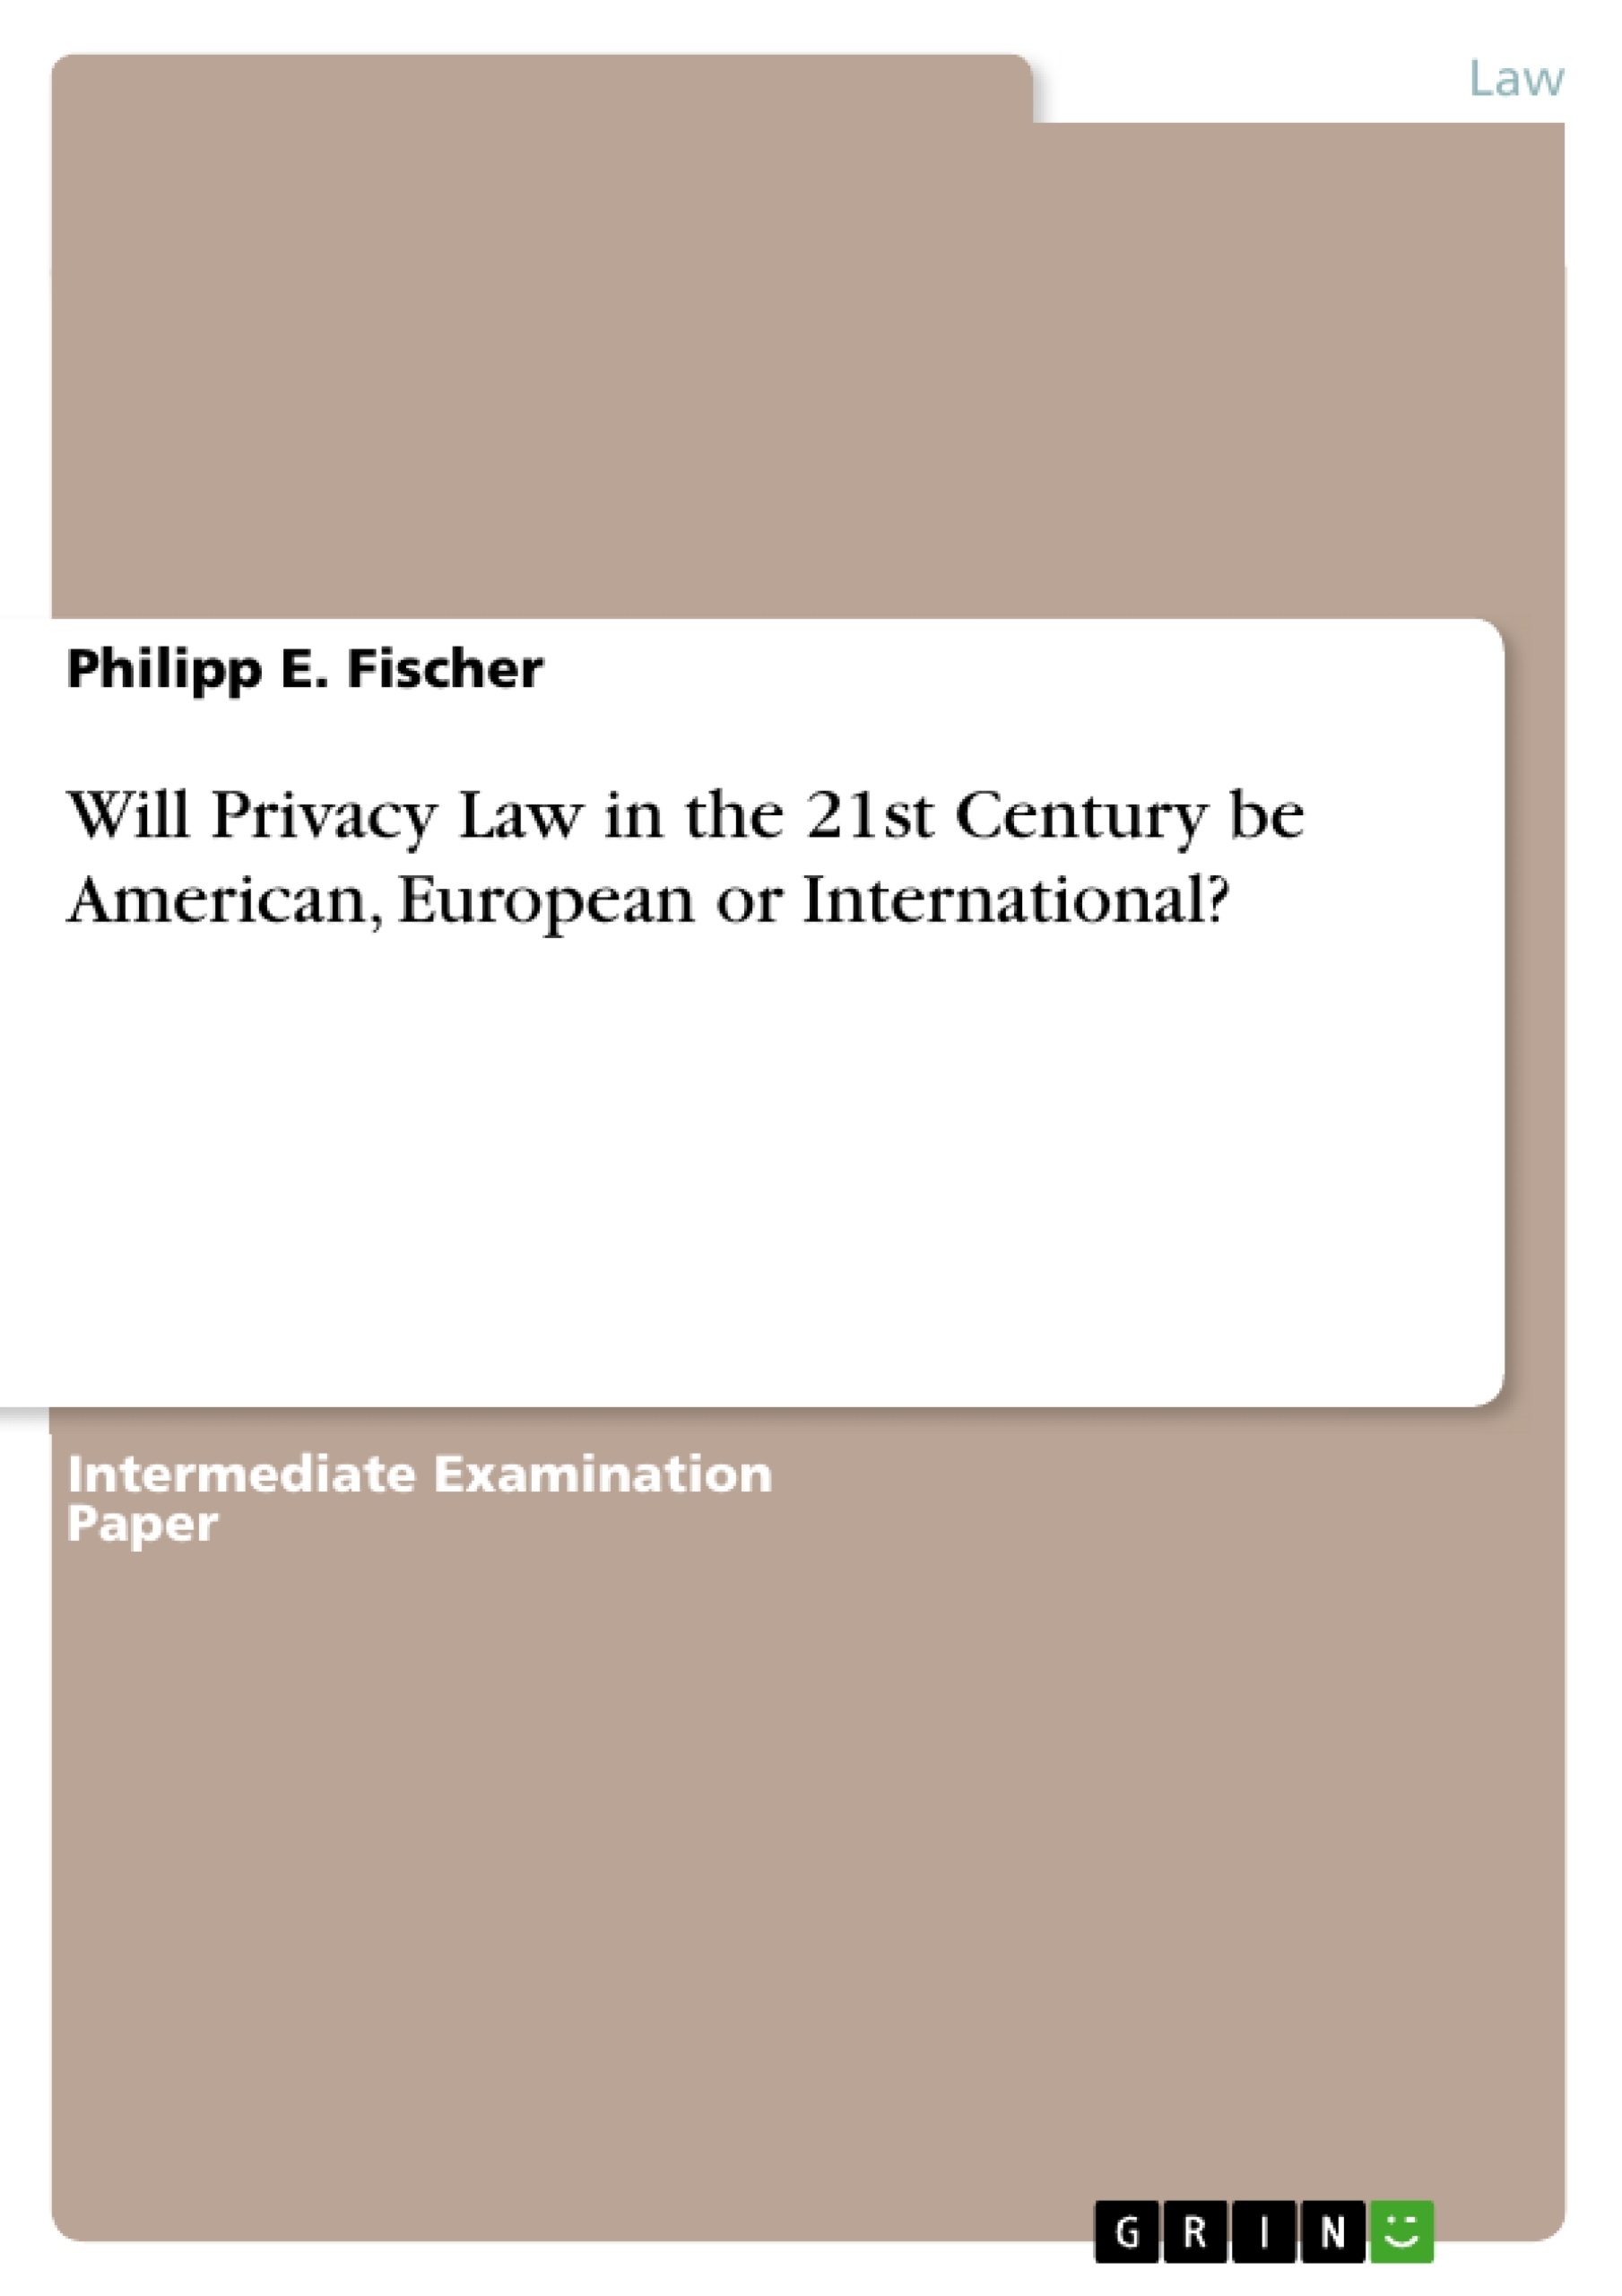 Title: Will Privacy Law in the 21st Century be American, European or International?